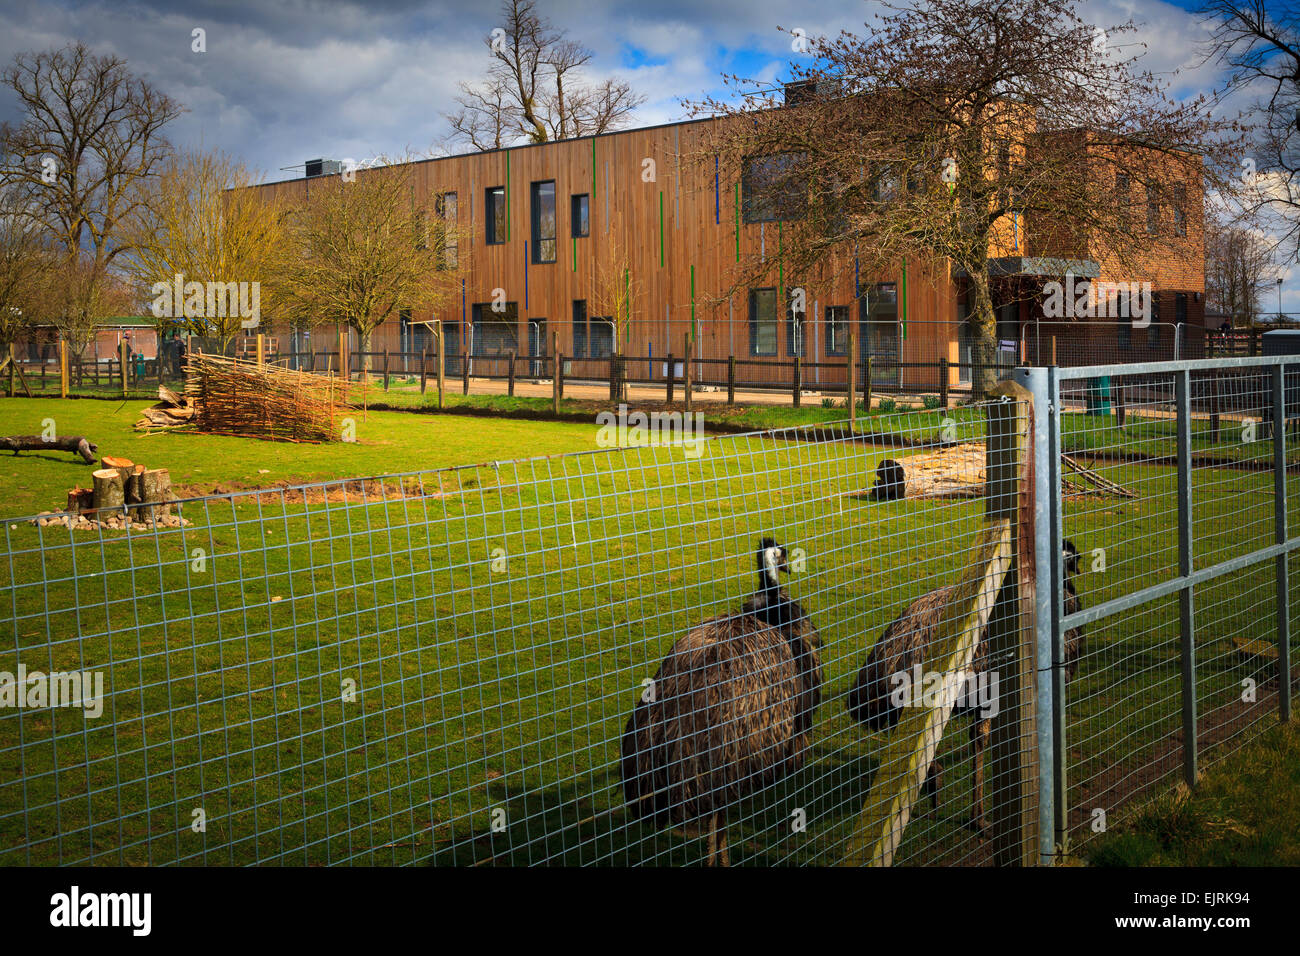 Rheas in a fenced enclosure at the Berkshire college of agriculture Stock Photo